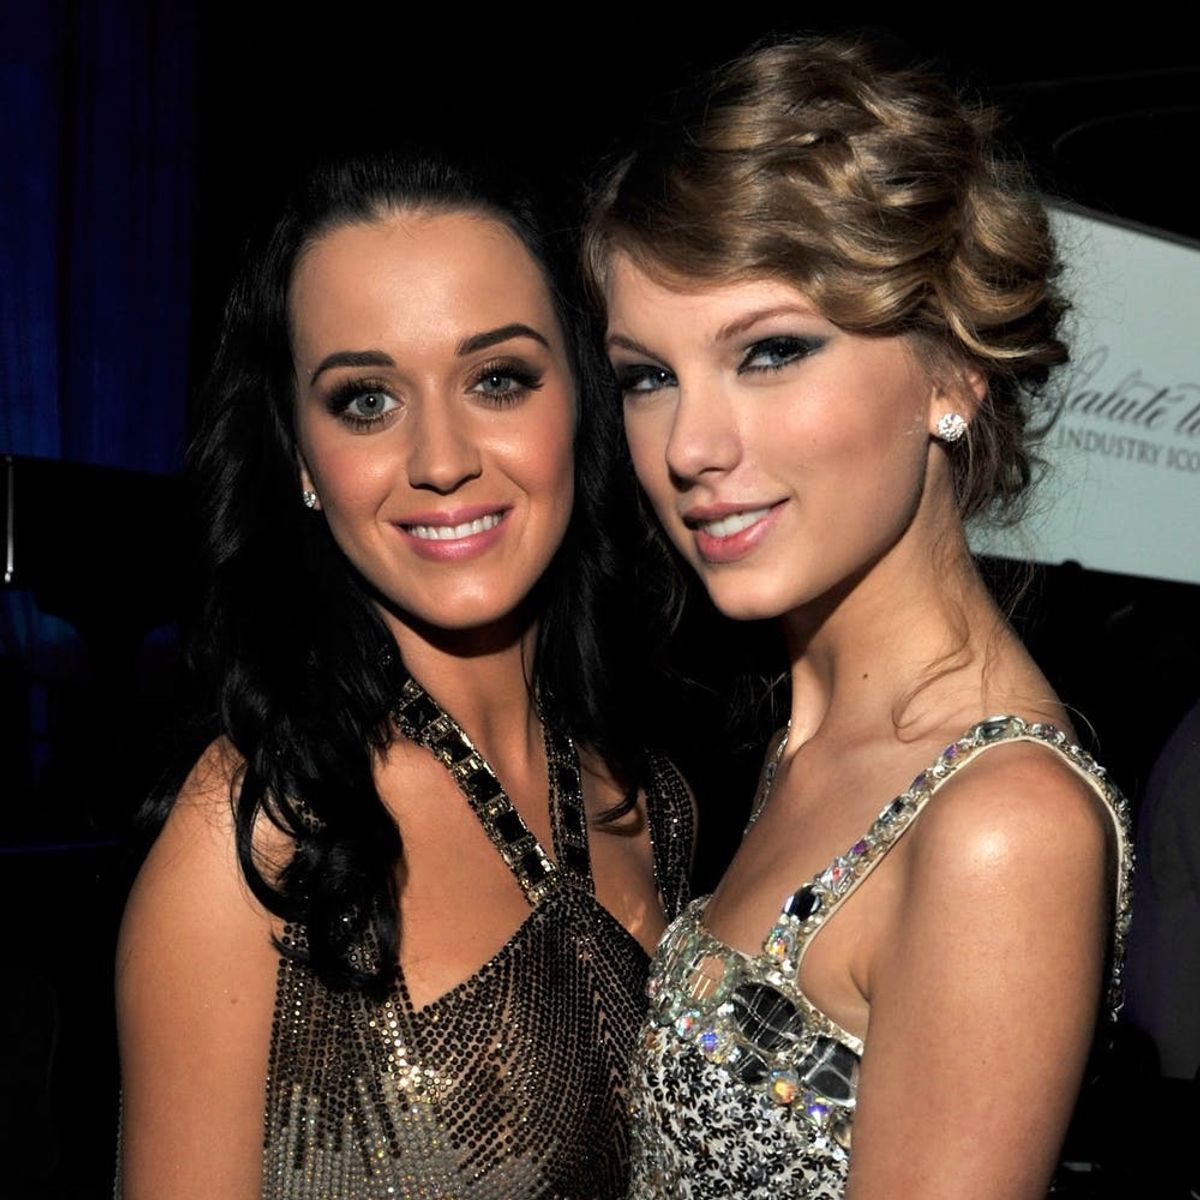 Katy Perry Sent an Actual Olive Branch to Taylor Swift to End Their Feud Once and for All